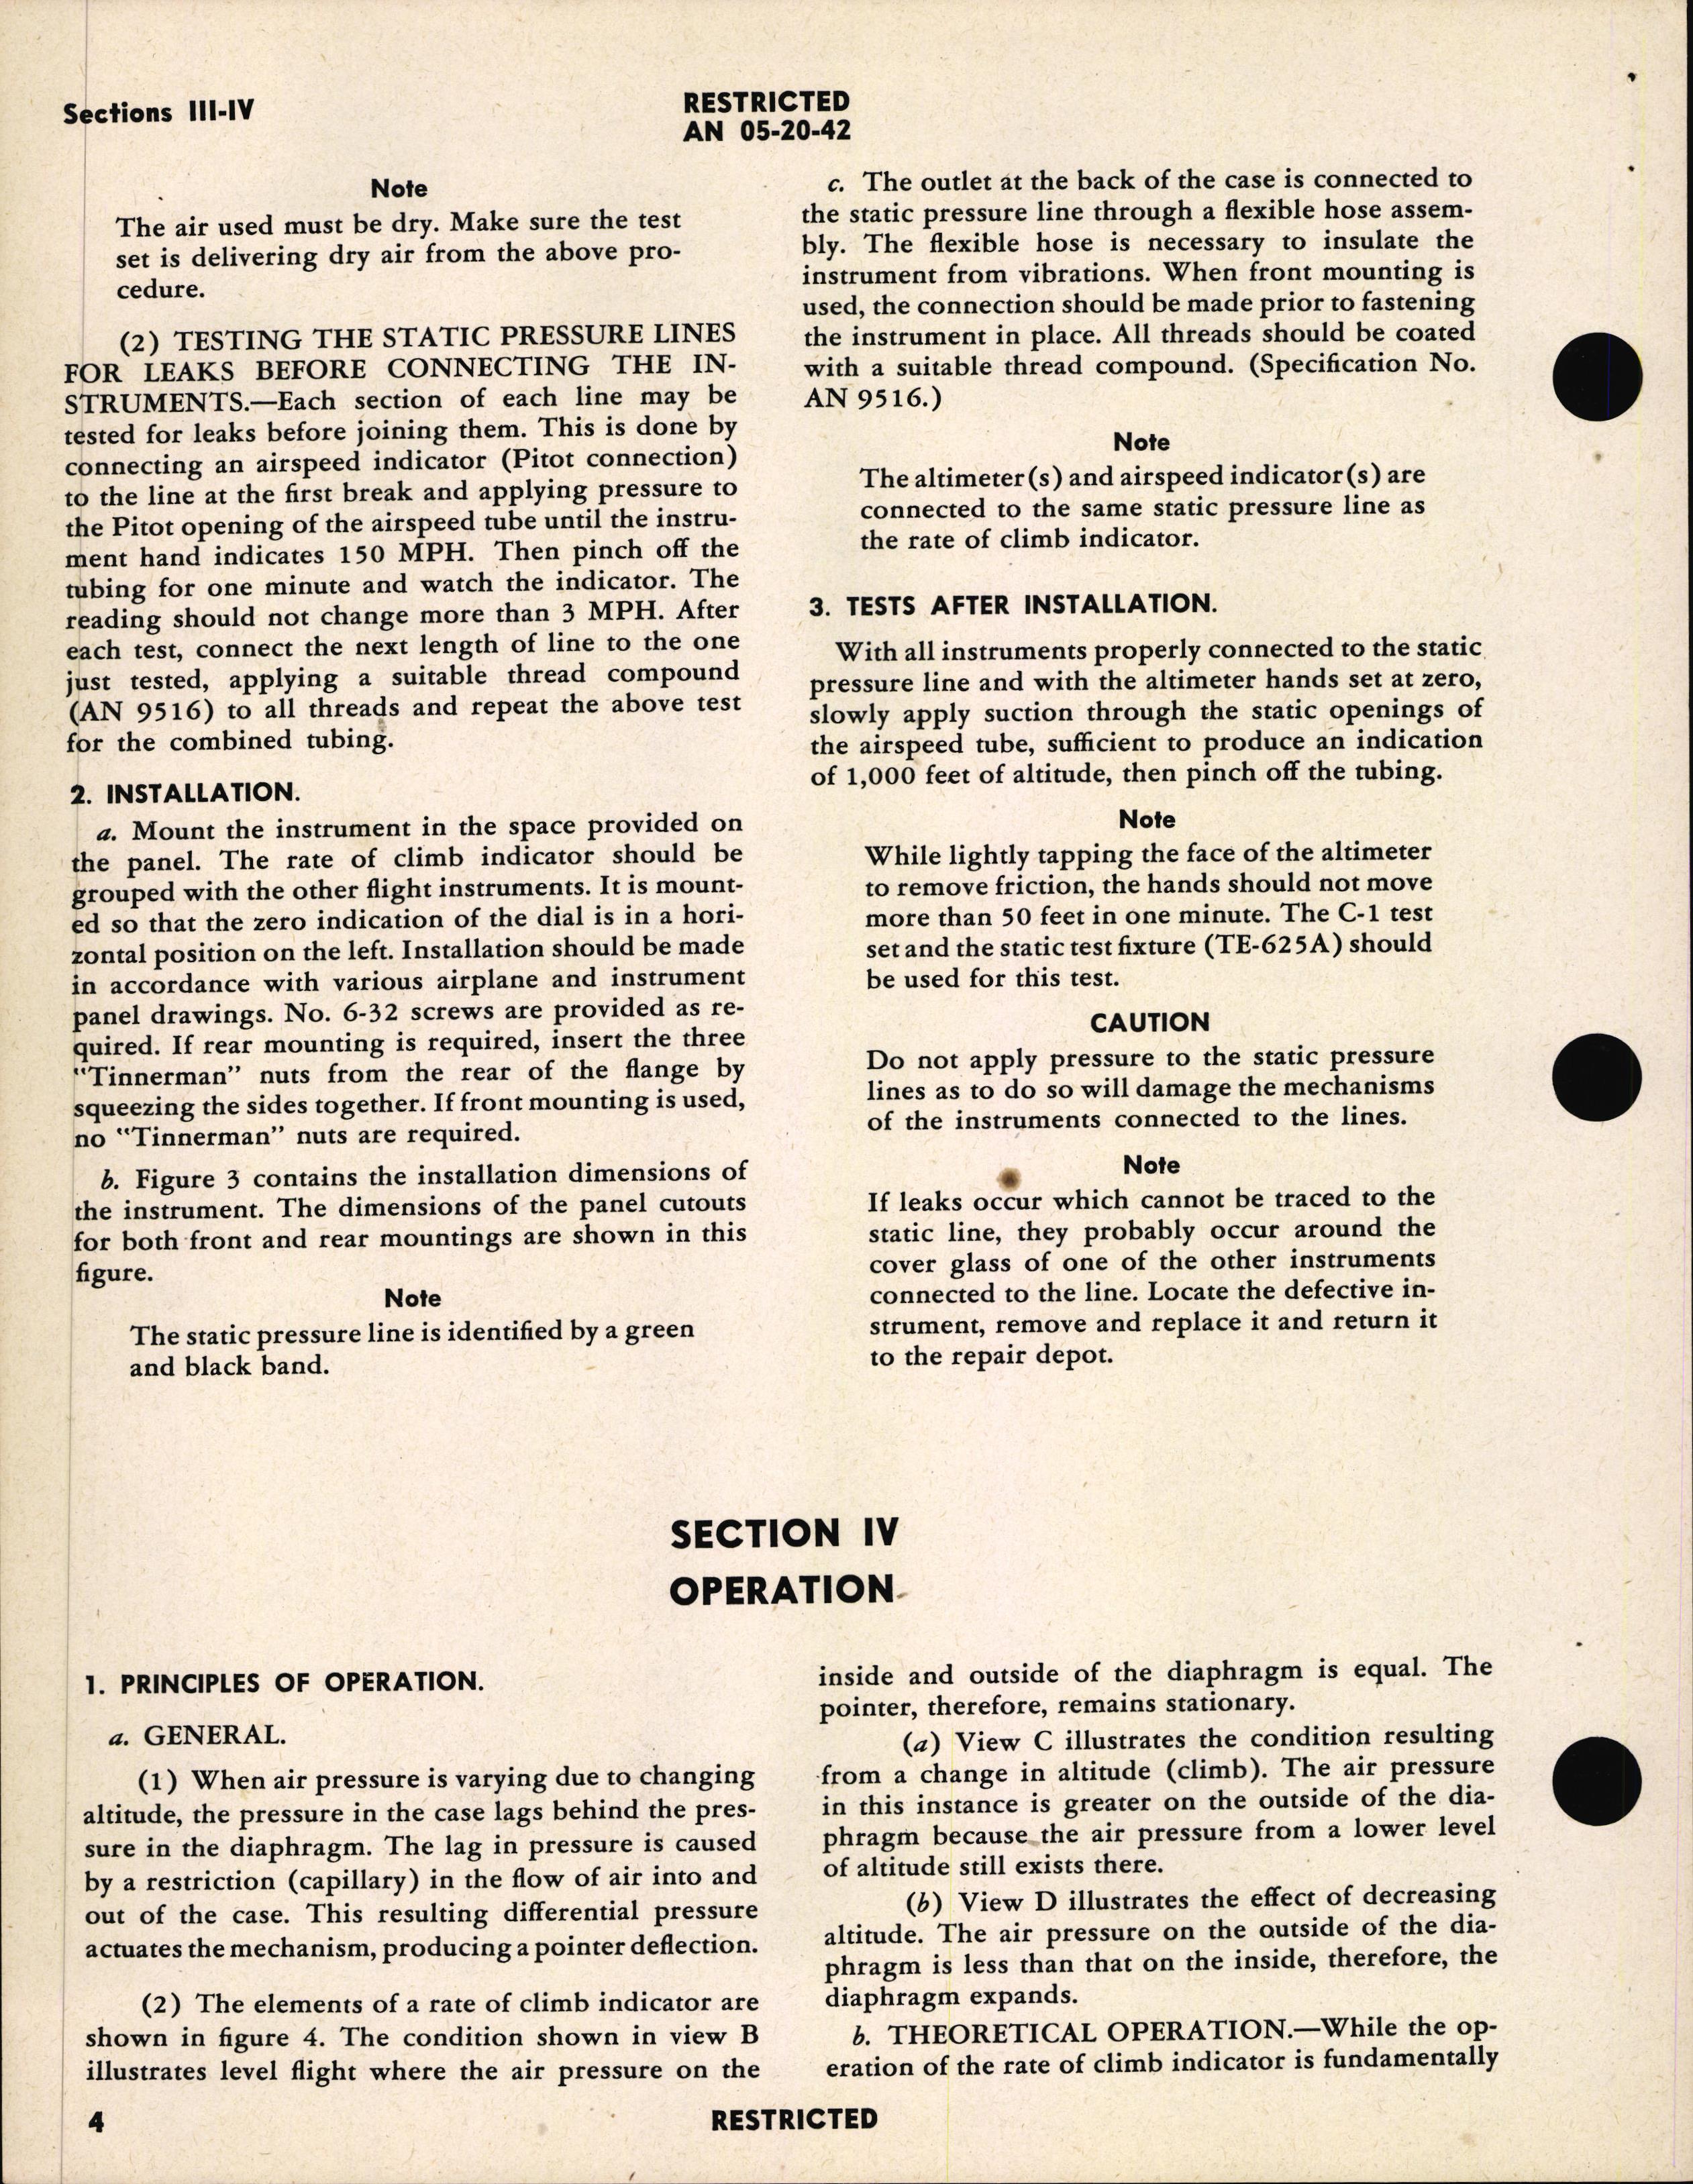 Sample page 8 from AirCorps Library document: Handbook of Instructions with Parts Catalog for Type C-3 Rate of Climb Indicator